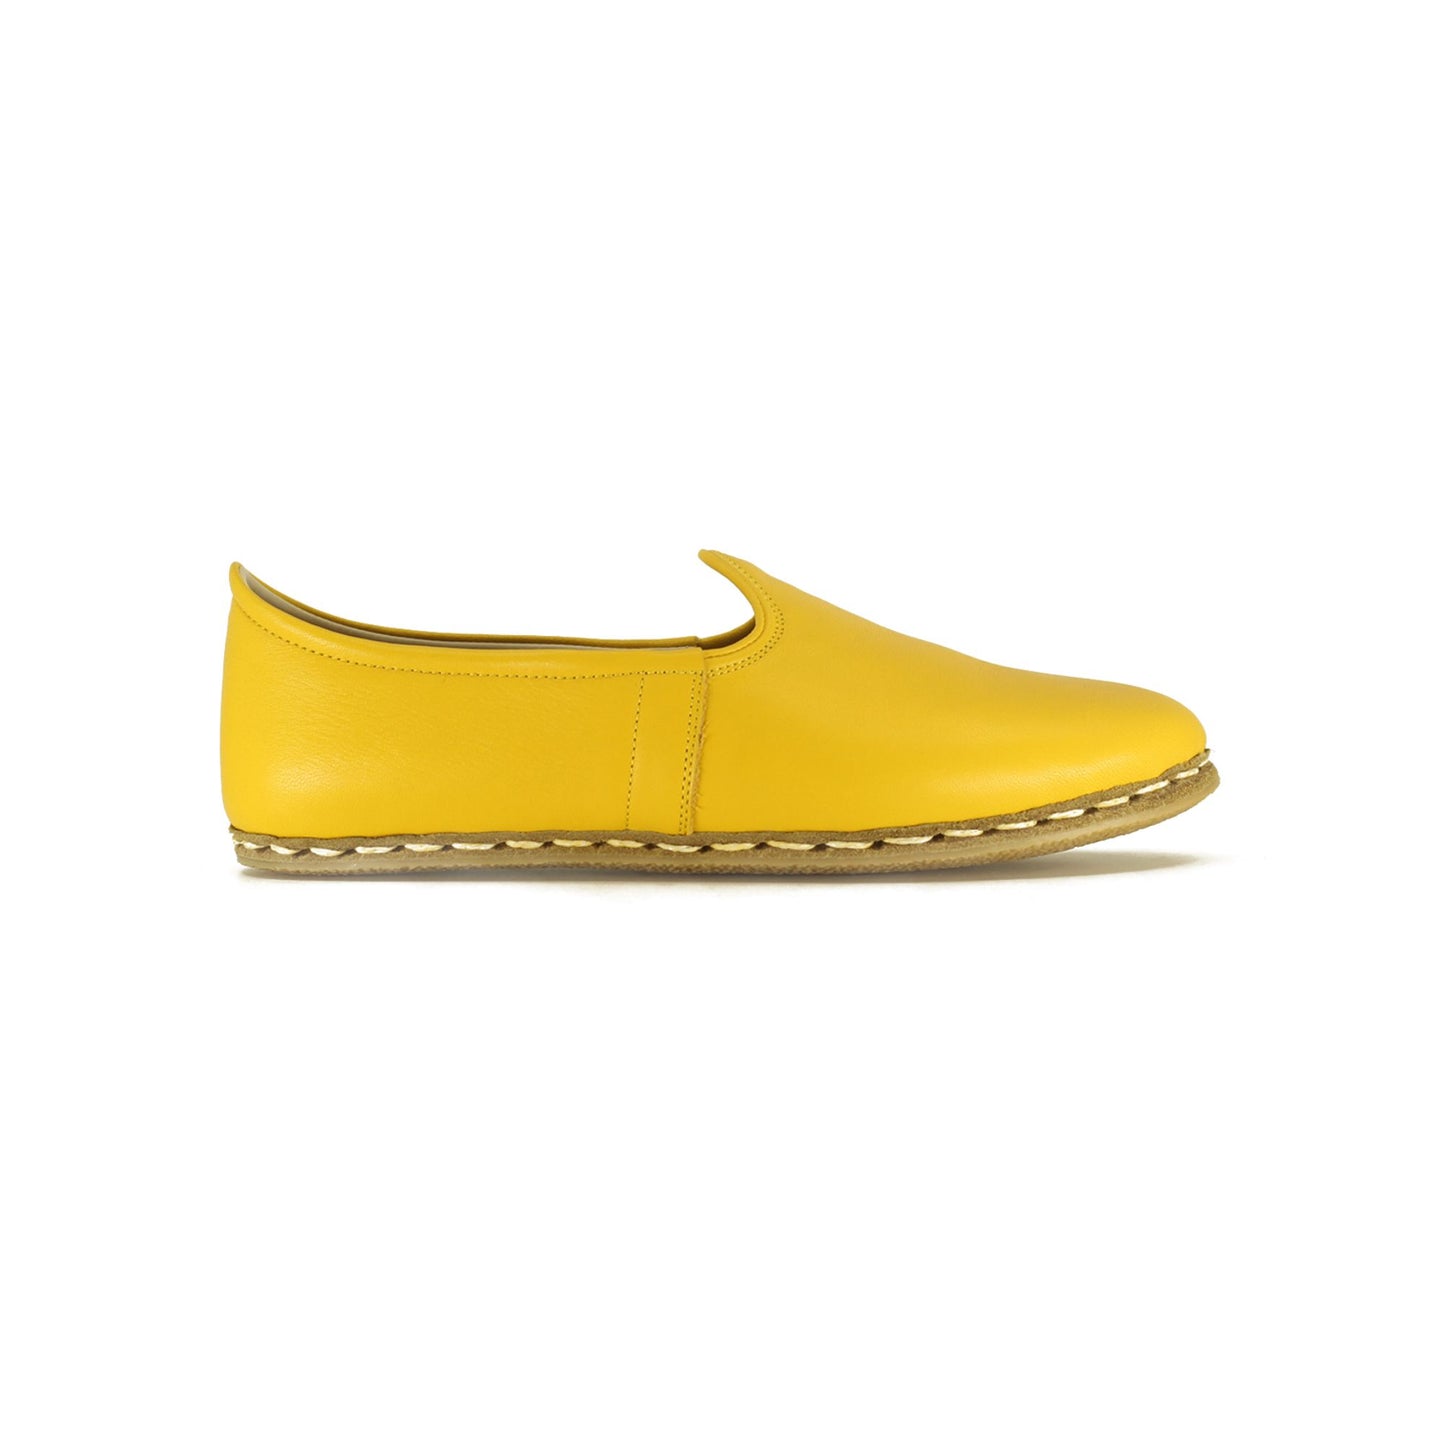 Yellow Leather Handmade Shoes For Women Rubber Sole - Nefes Shoes